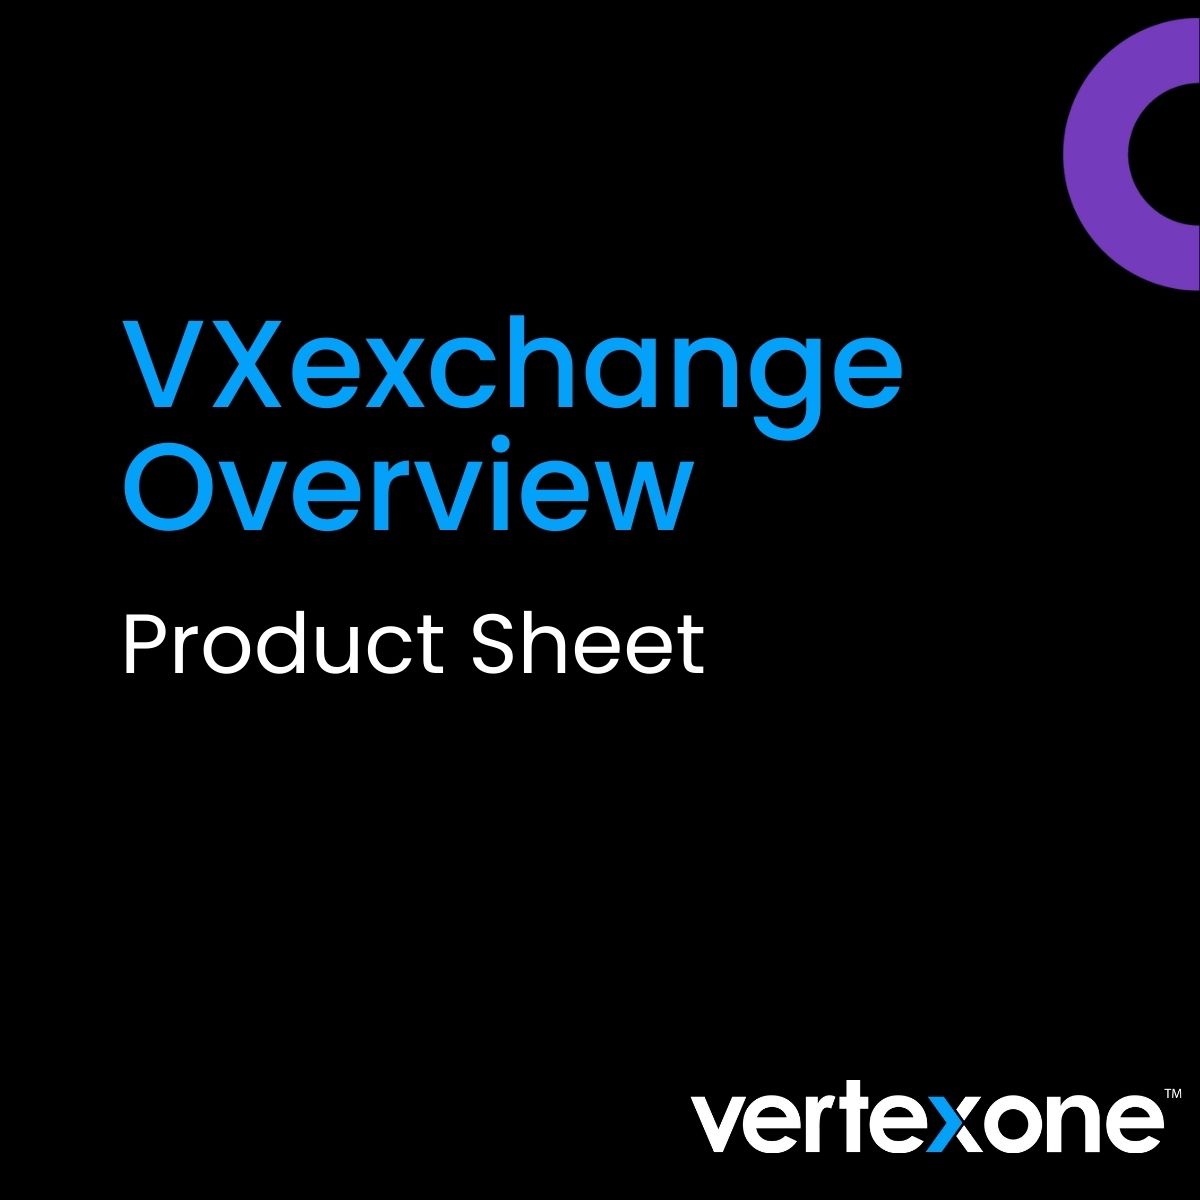 VXexchange Overview Product Sheet